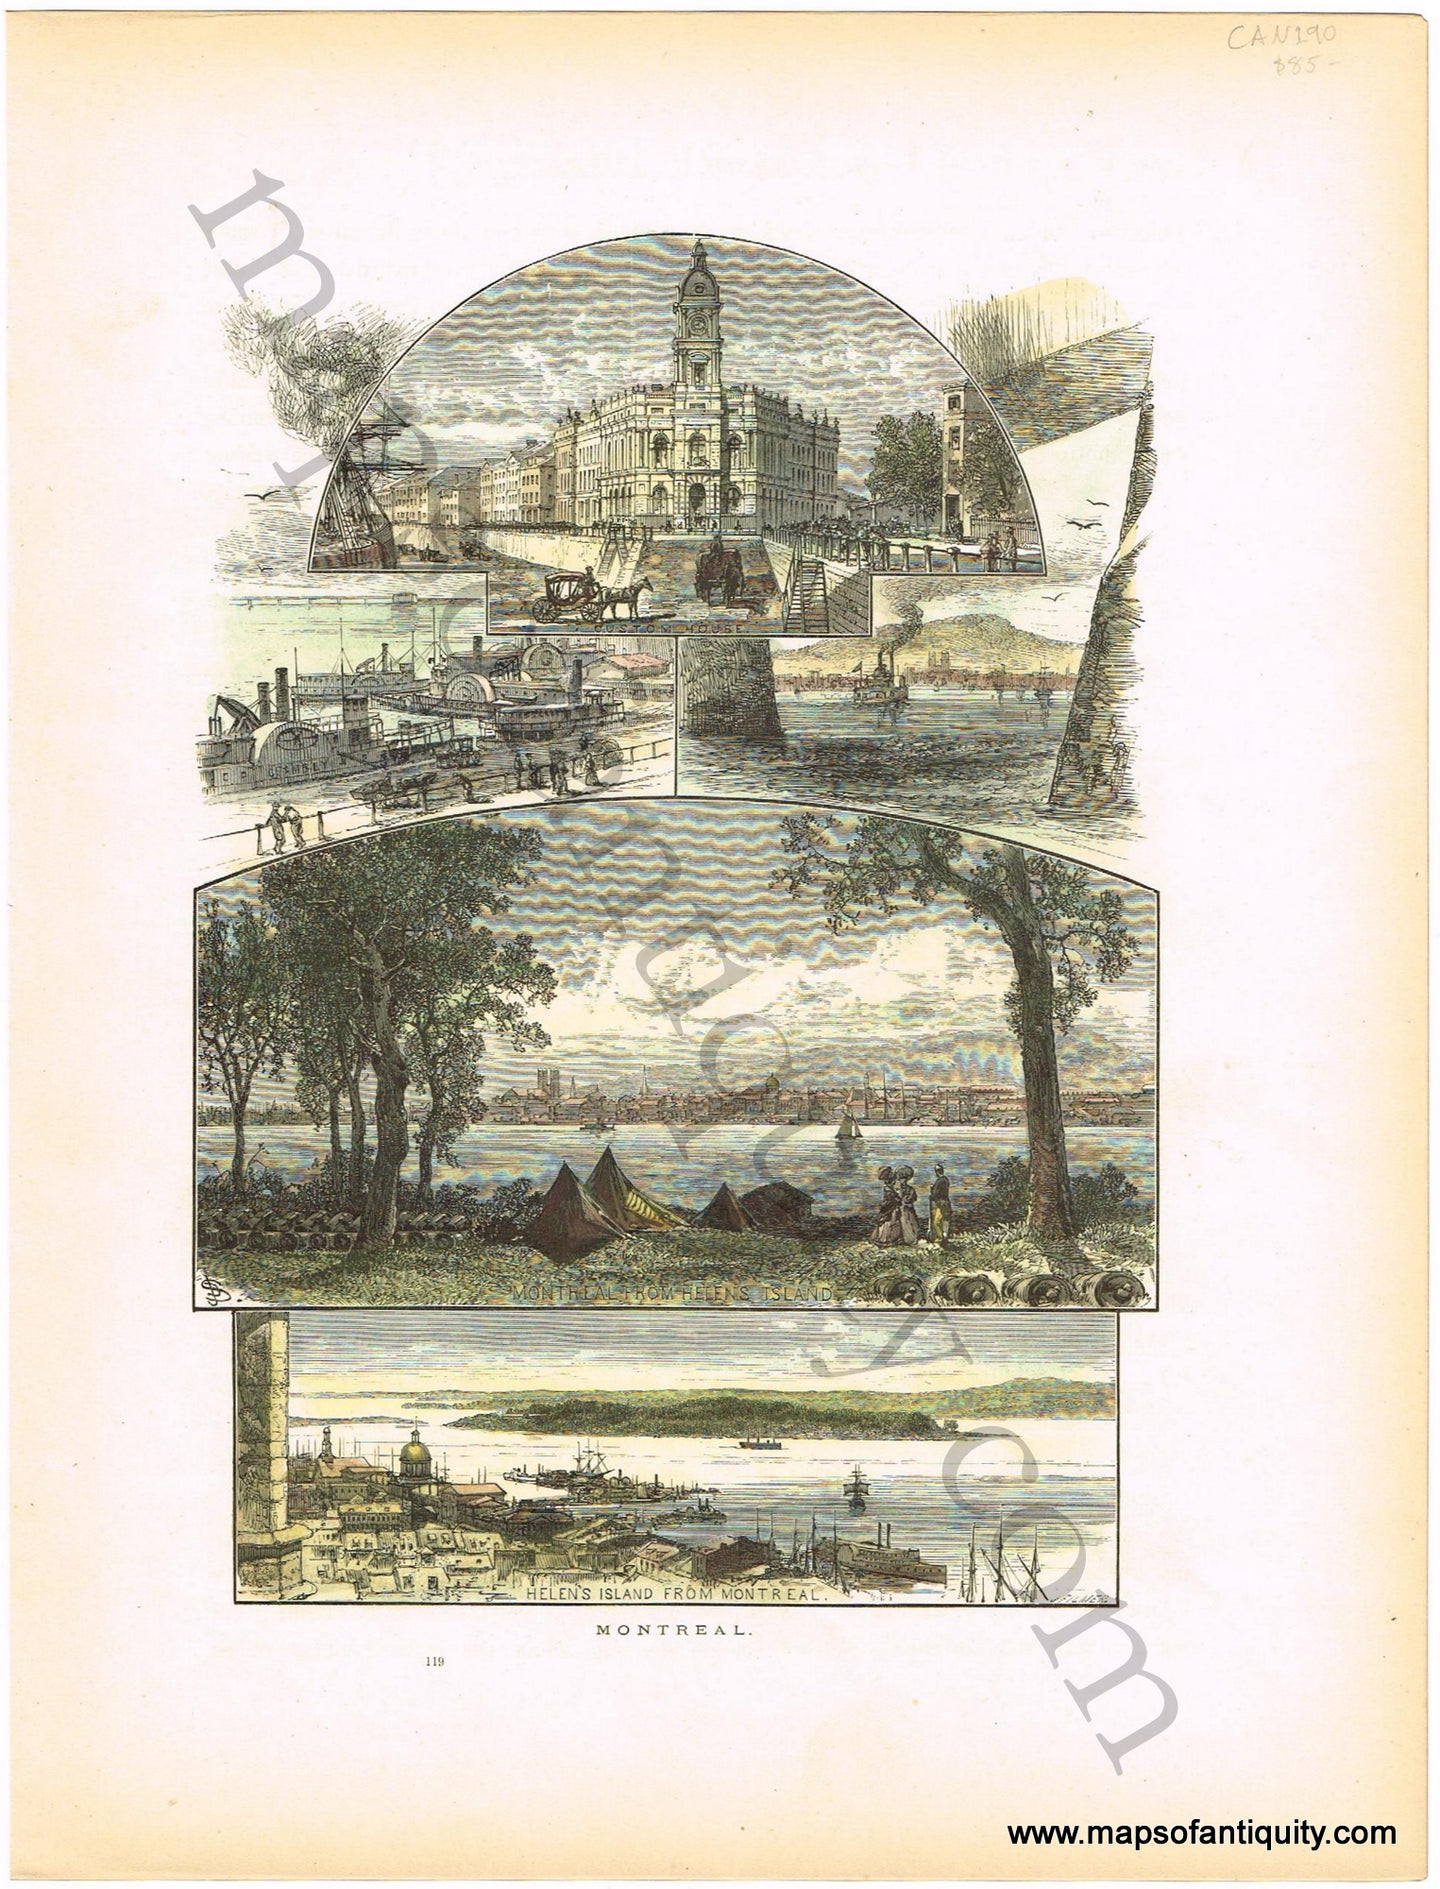 Hand-Colored-Woodcut-Engraving-Montreal-(Canada)-Canada-Montreal-1872-Picturesque-America-Maps-Of-Antiquity